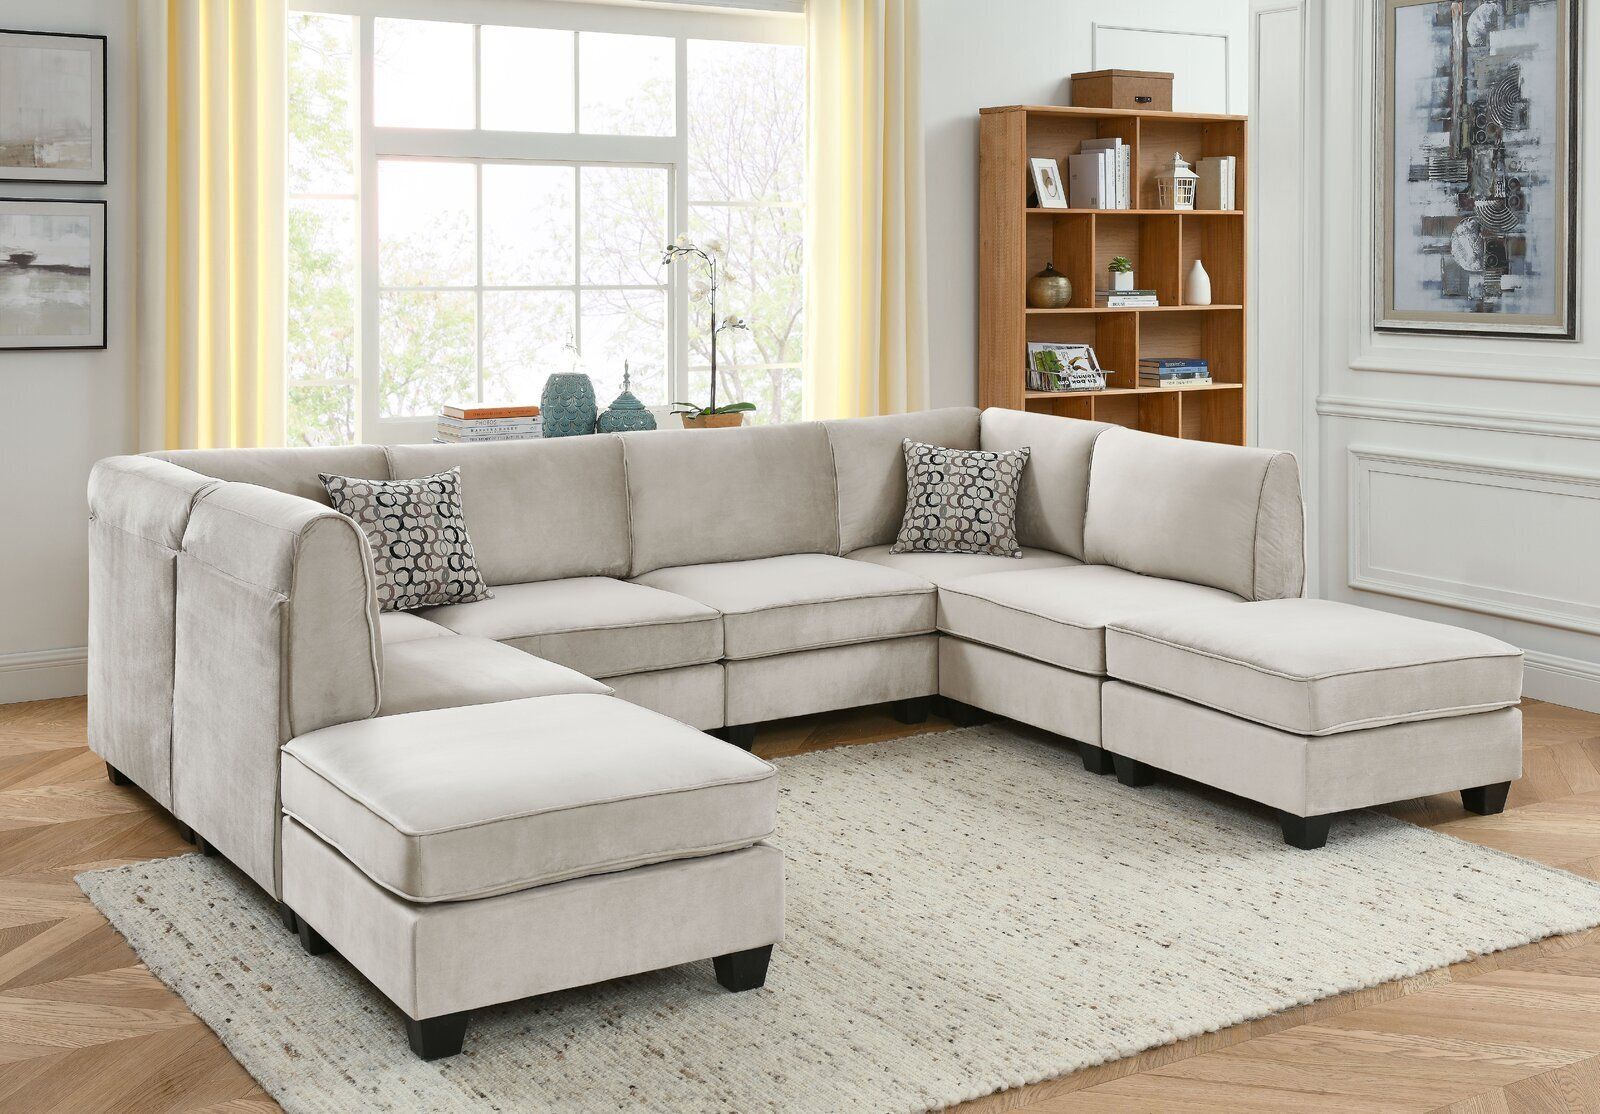 Sectional Sofa With Ottoman – Foter In Sofas With Ottomans (View 11 of 15)